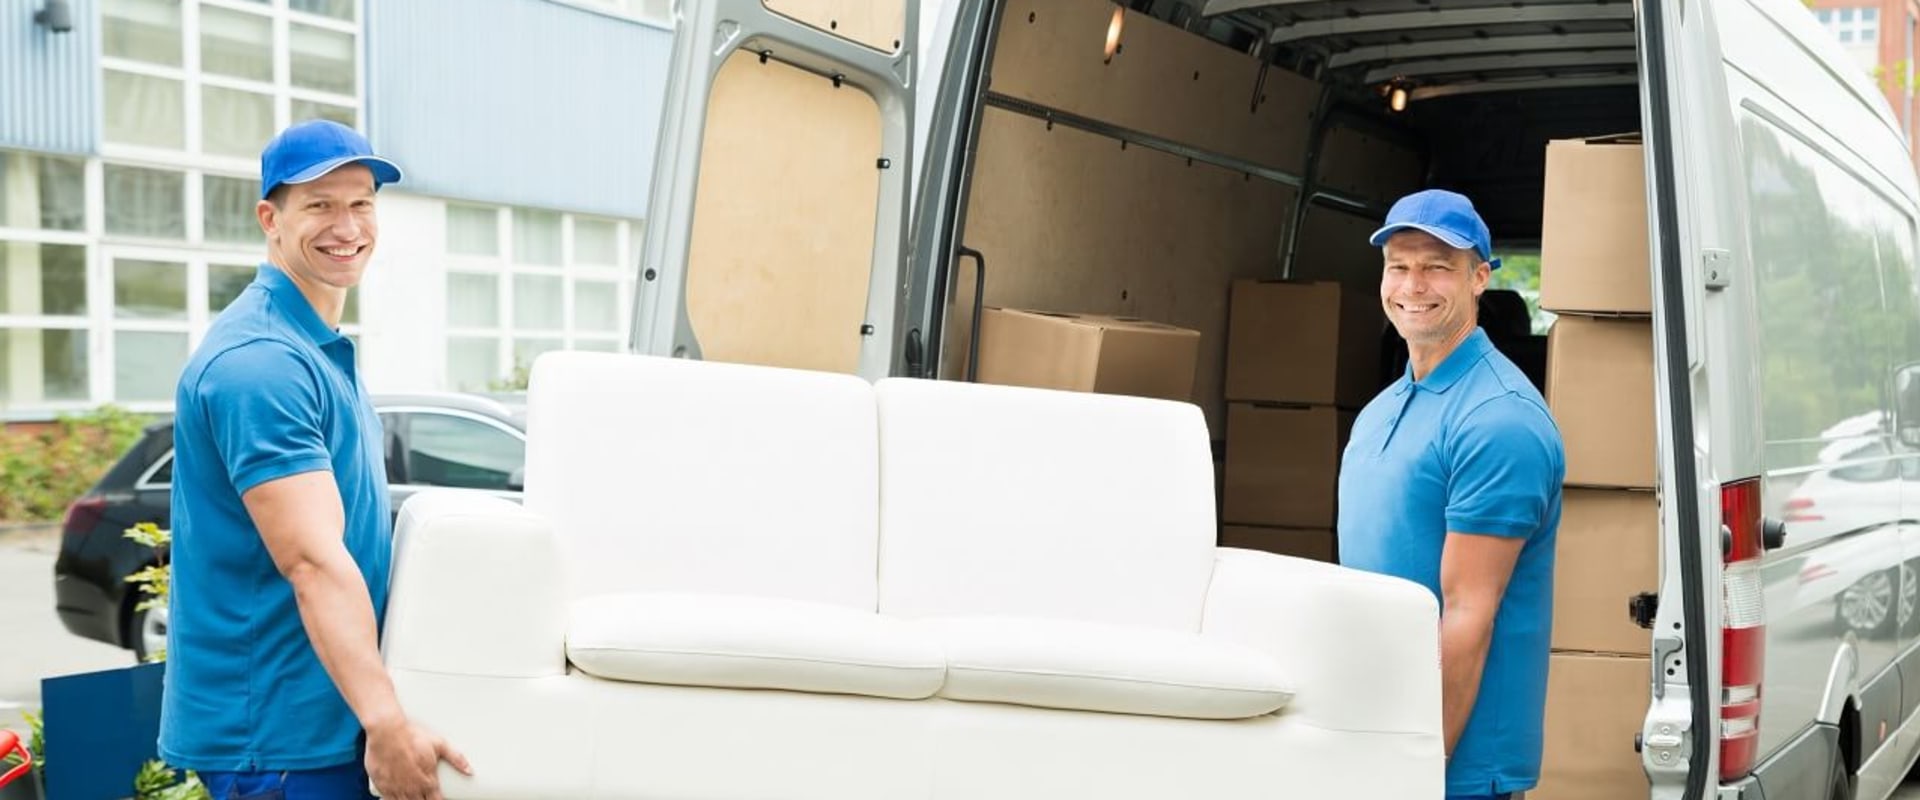 Find the Best Spokane Movers for Your Move